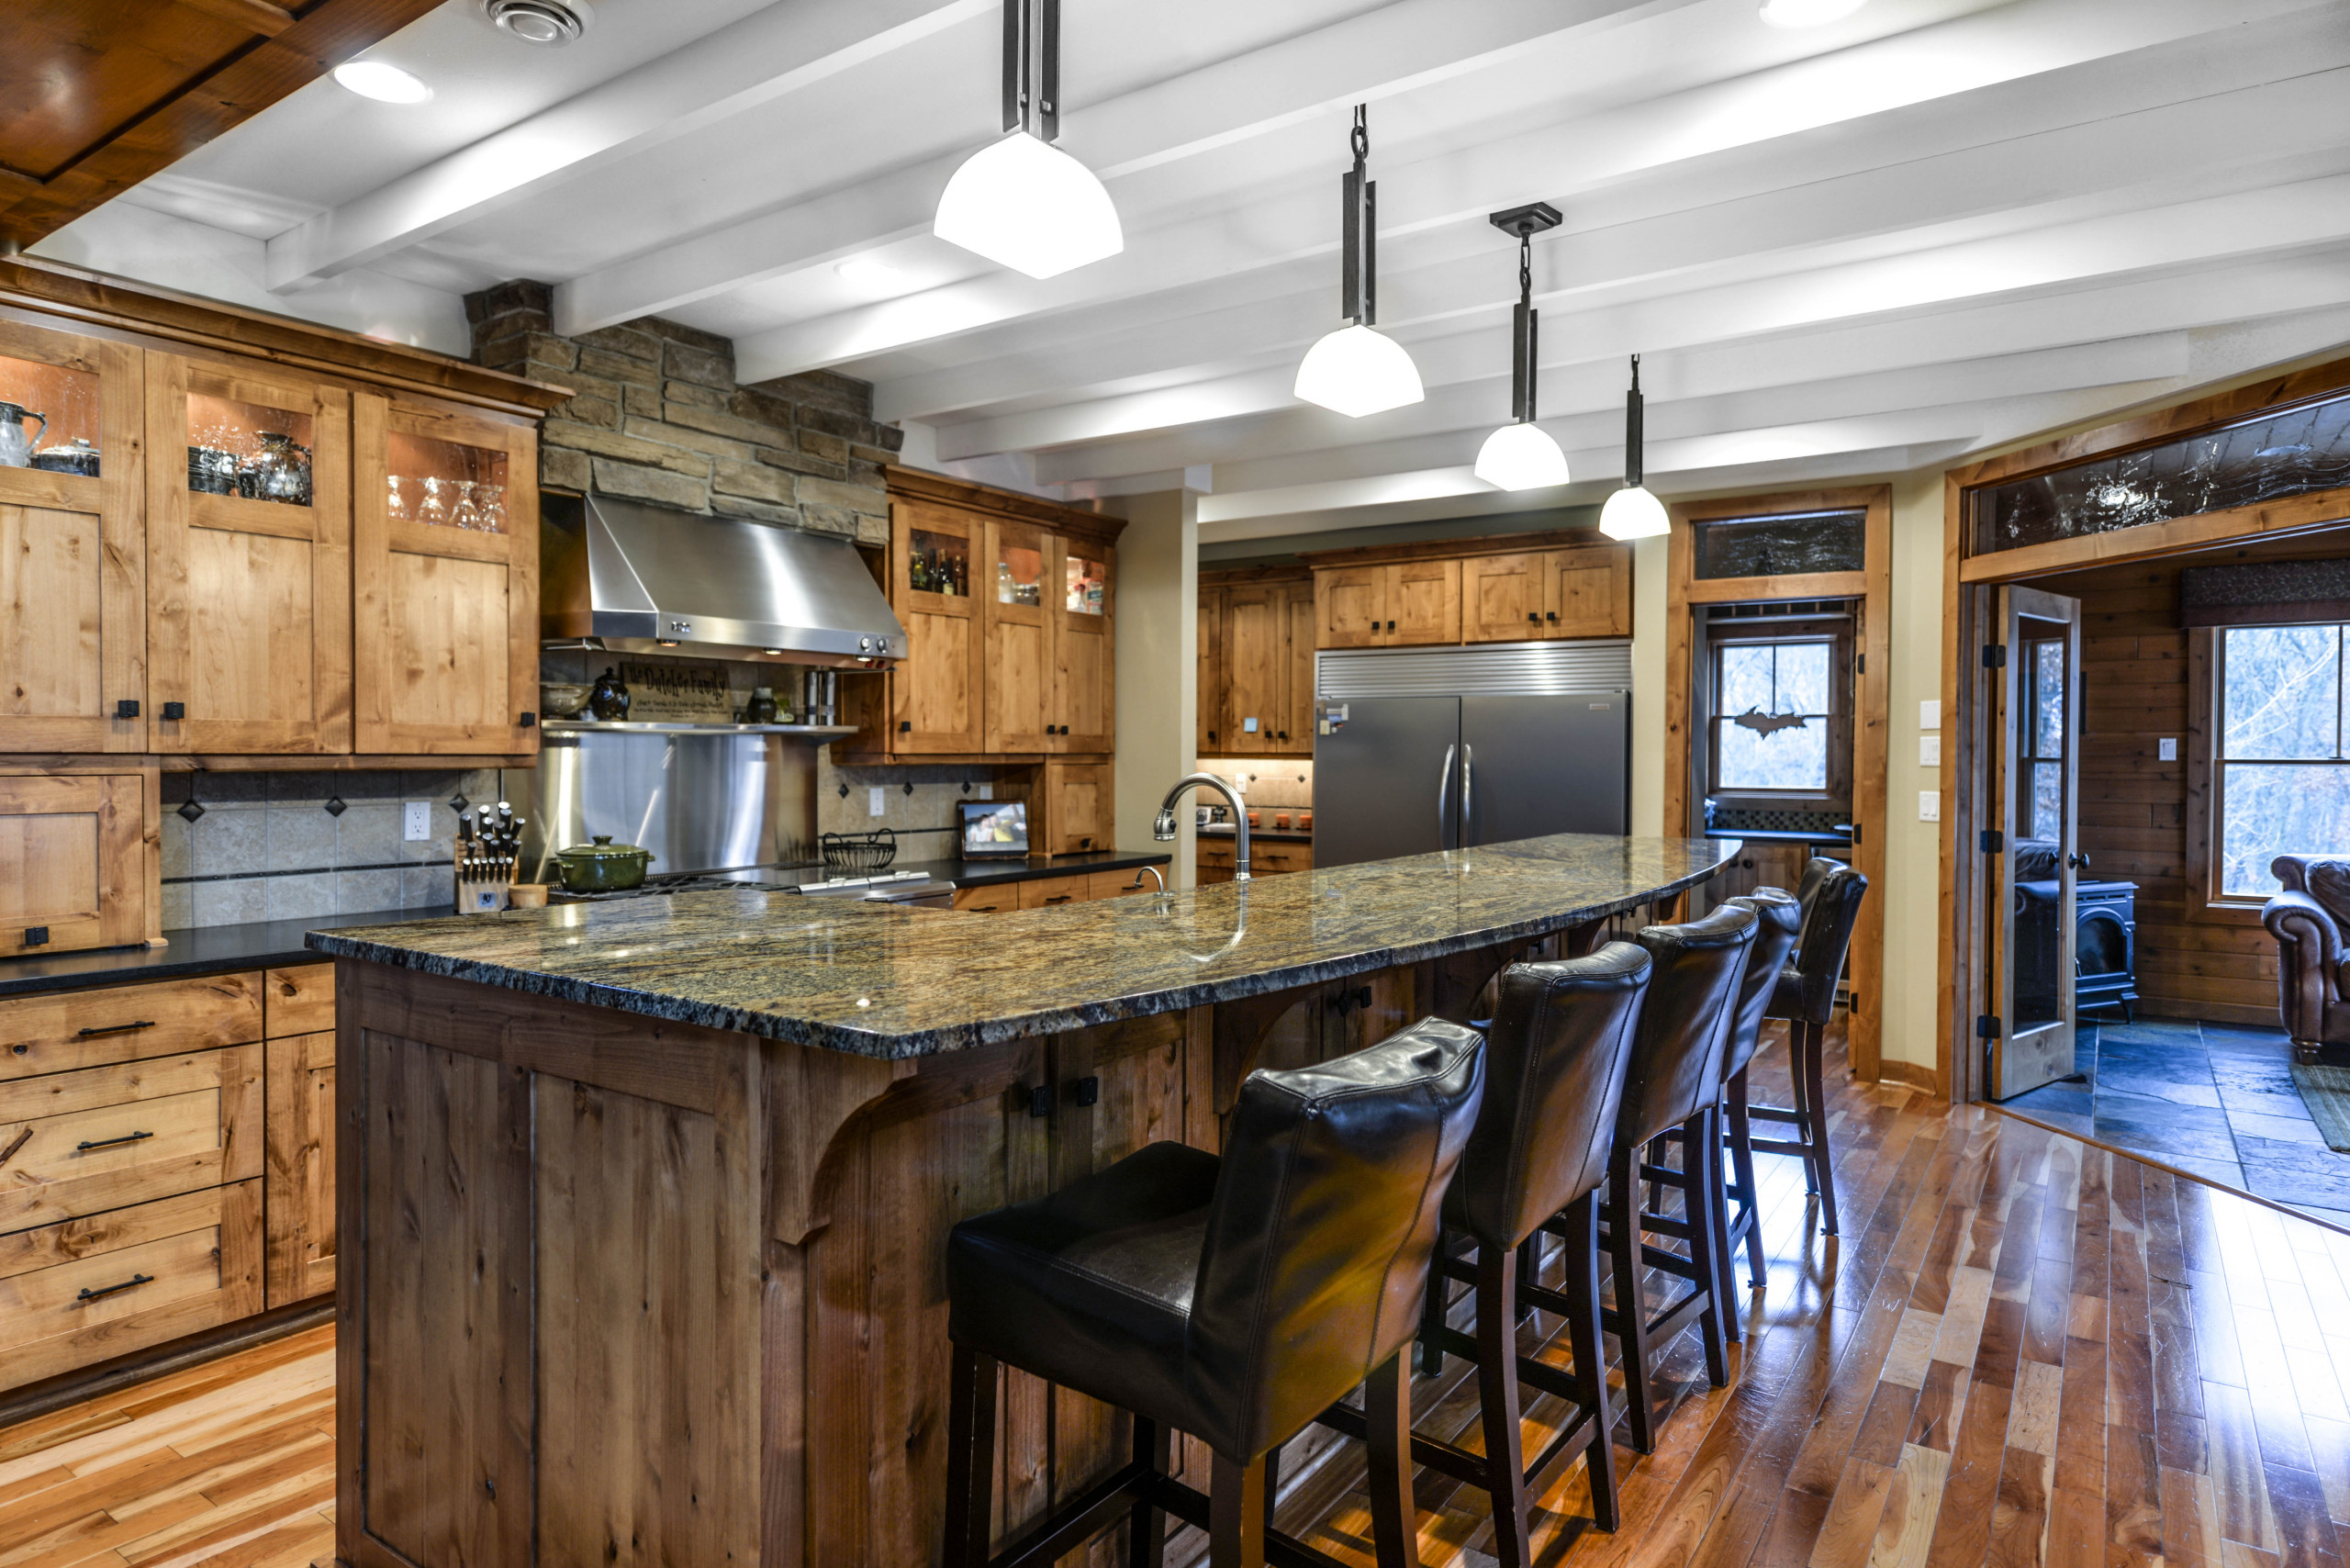 https://st.hzcdn.com/simgs/pictures/kitchens/eagles-landing-lodge-style-2-story-saint-augusta-mn-werschay-homes-img~c8b19e2906bce7a3_14-4598-1-0ad9a2f.jpg